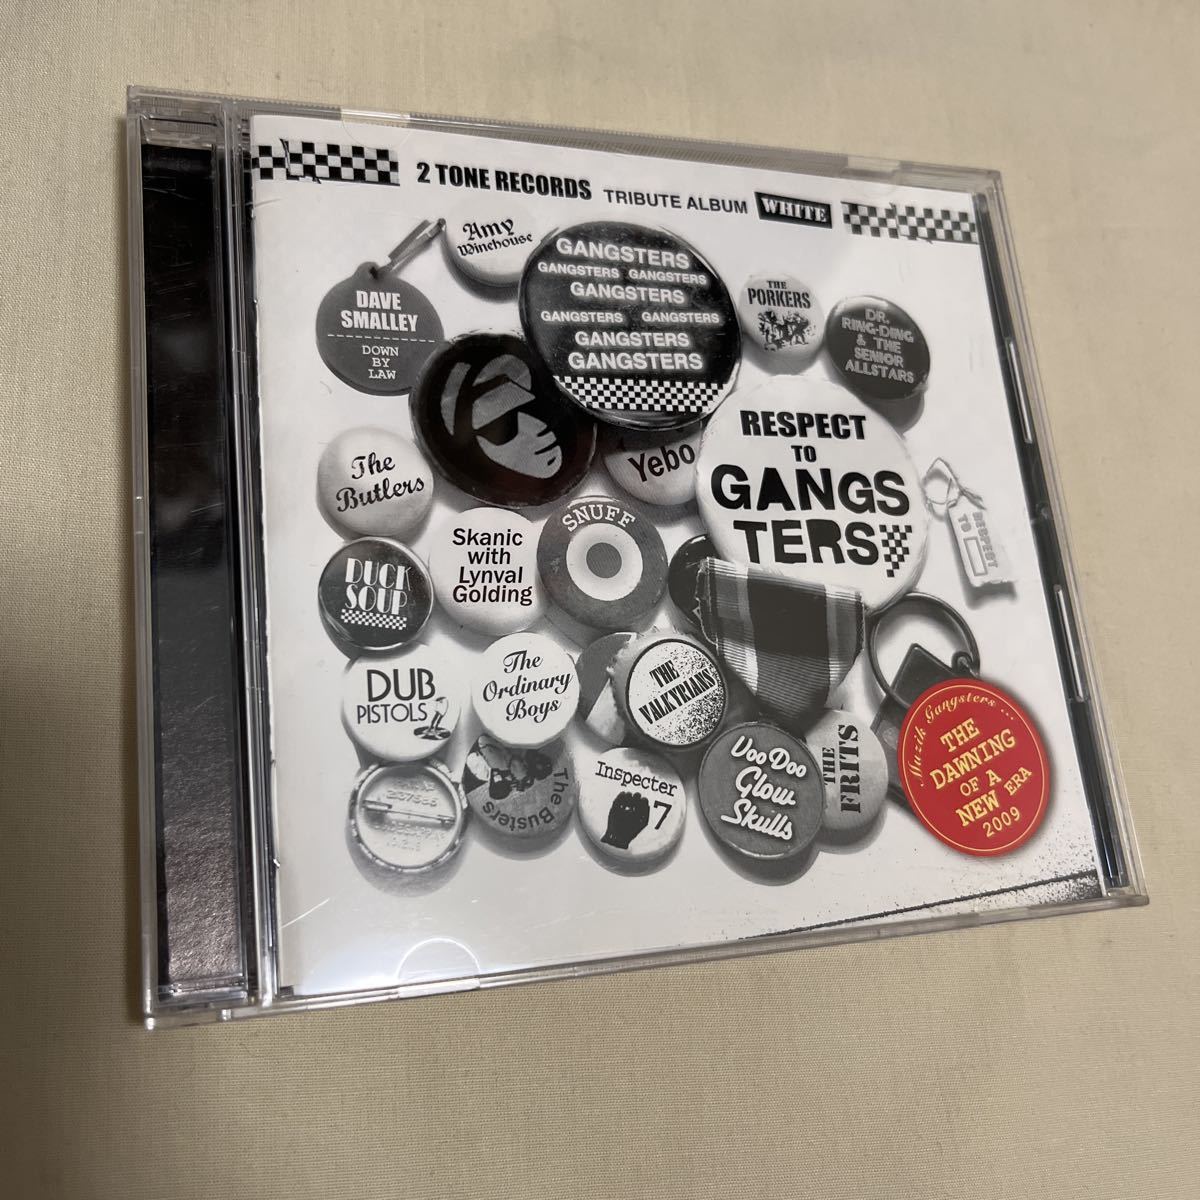 CD 2TONE RECORDS TRIBUTE ALBUM WHITE～RESPECT TO GANGSTERS～の画像1